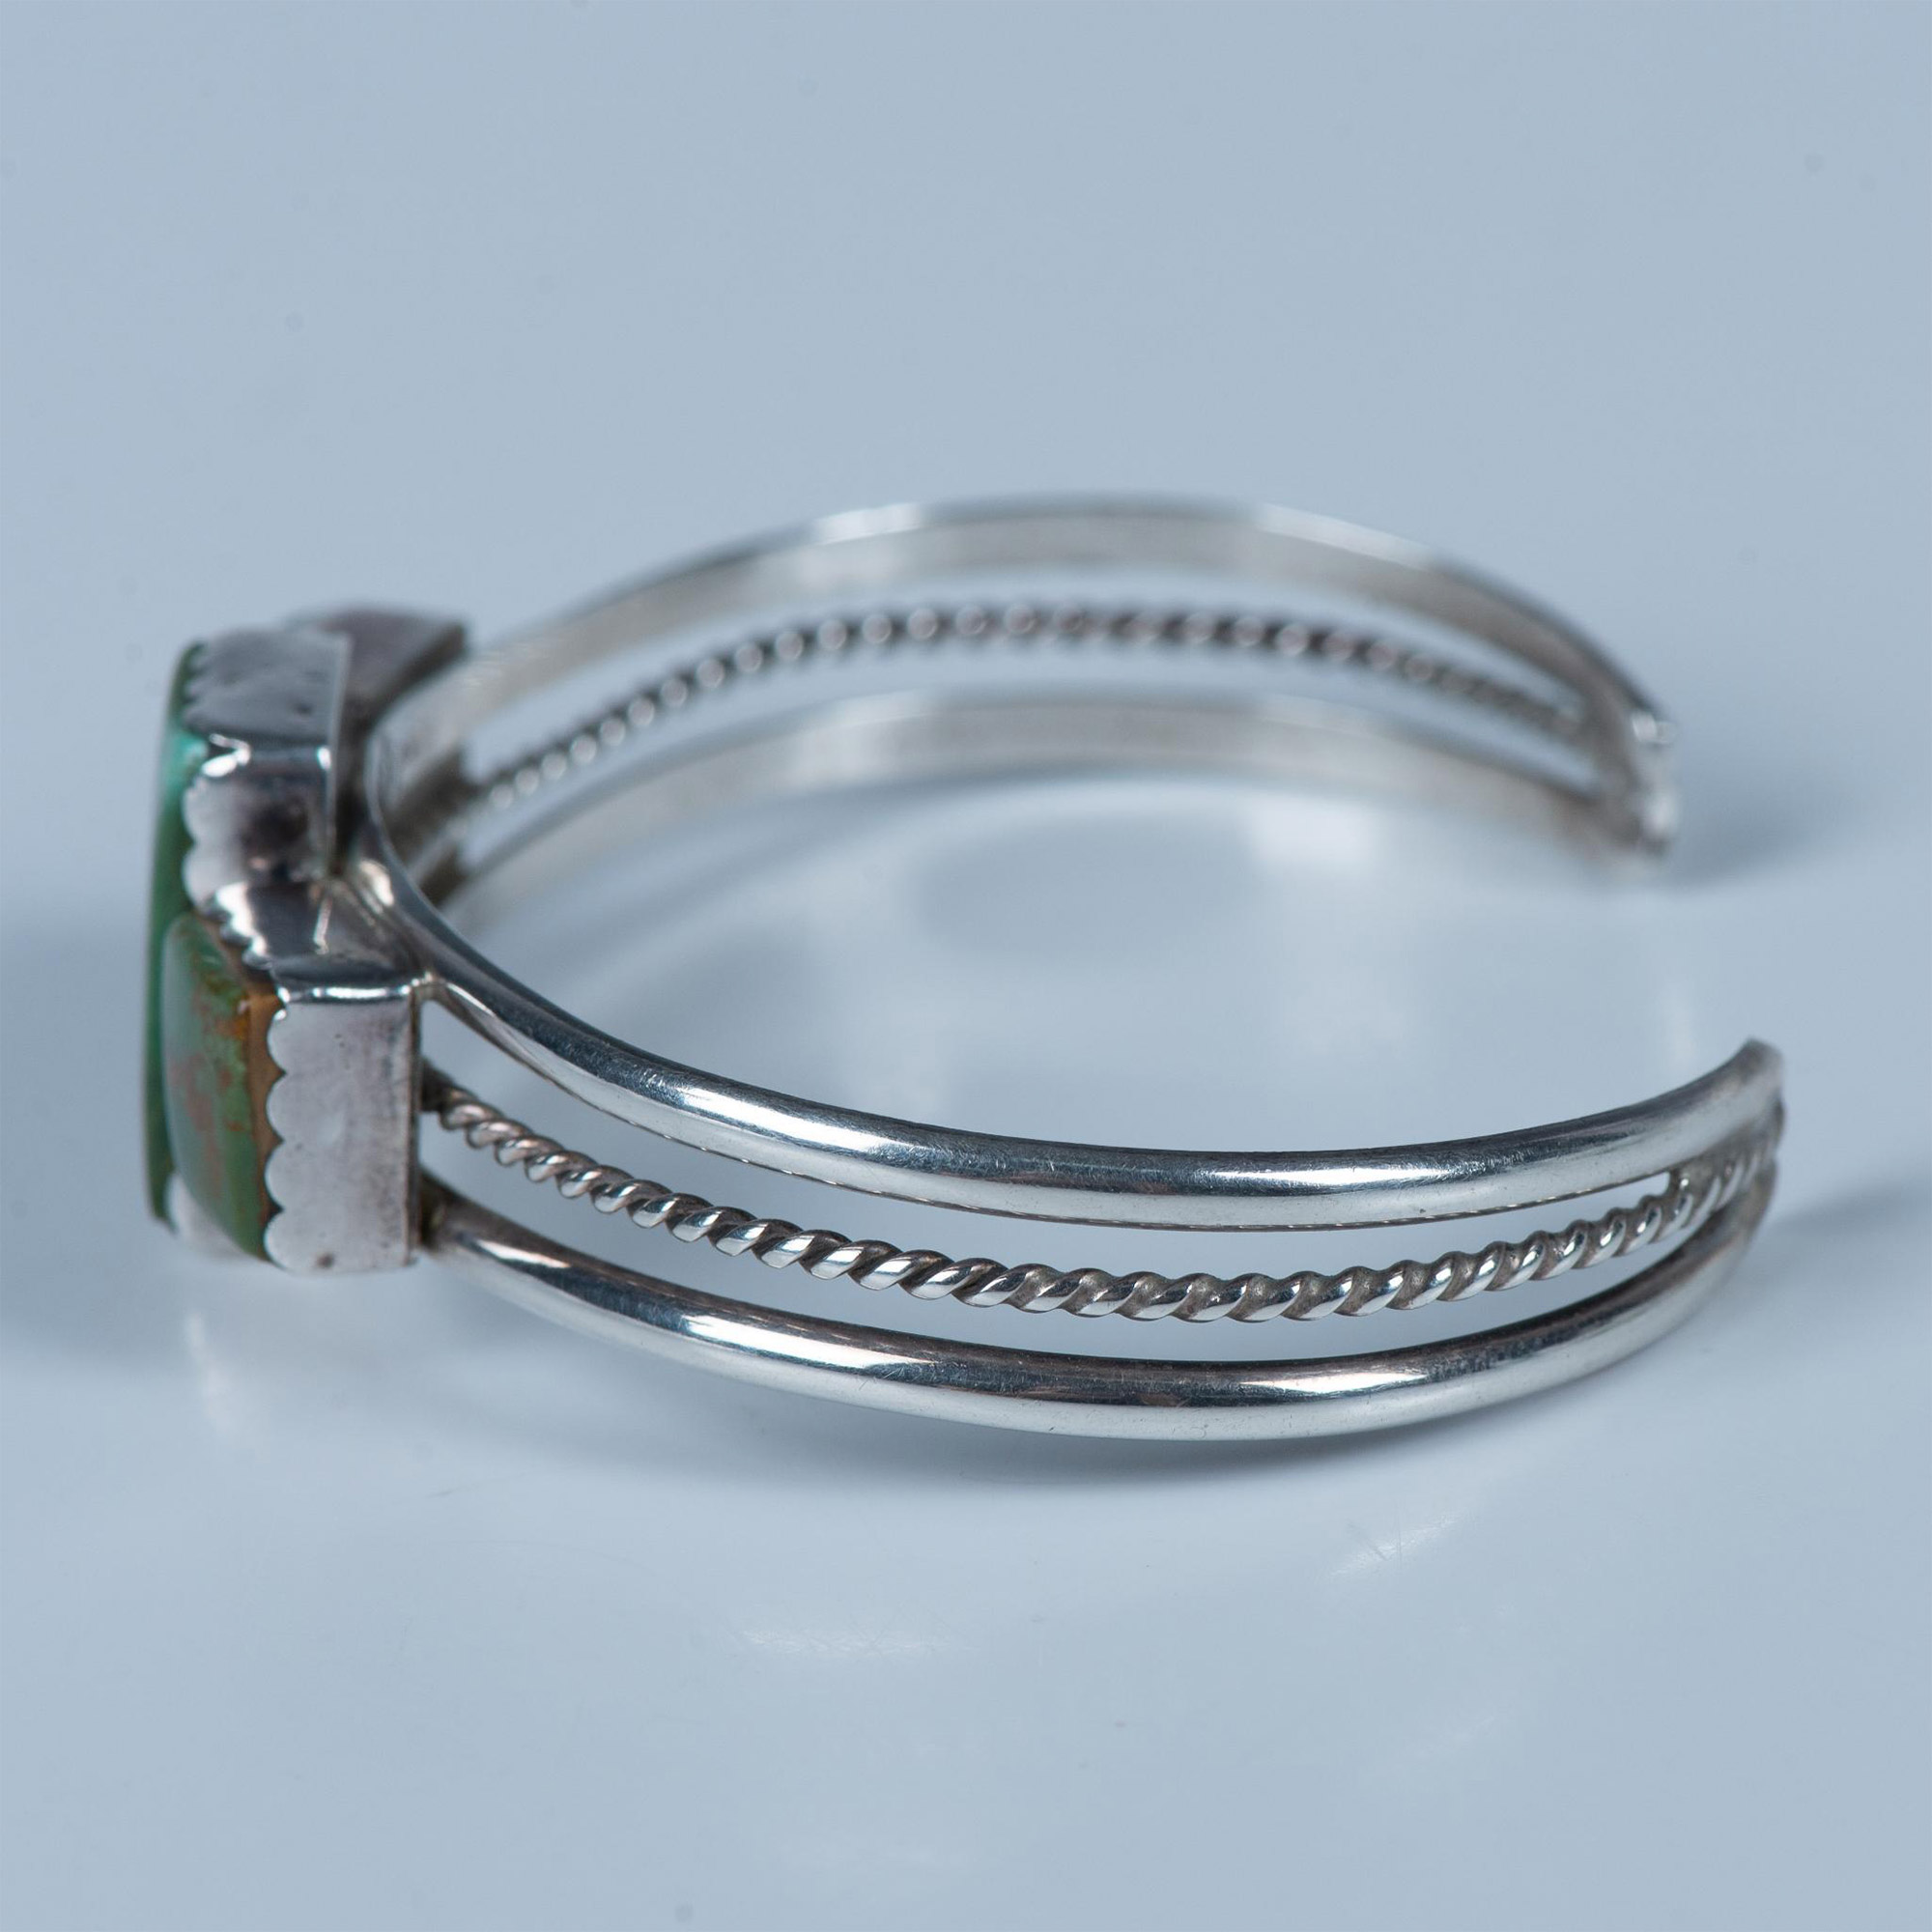 Native American Sterling & Green Turquoise Cuff Bracelet - Image 2 of 5